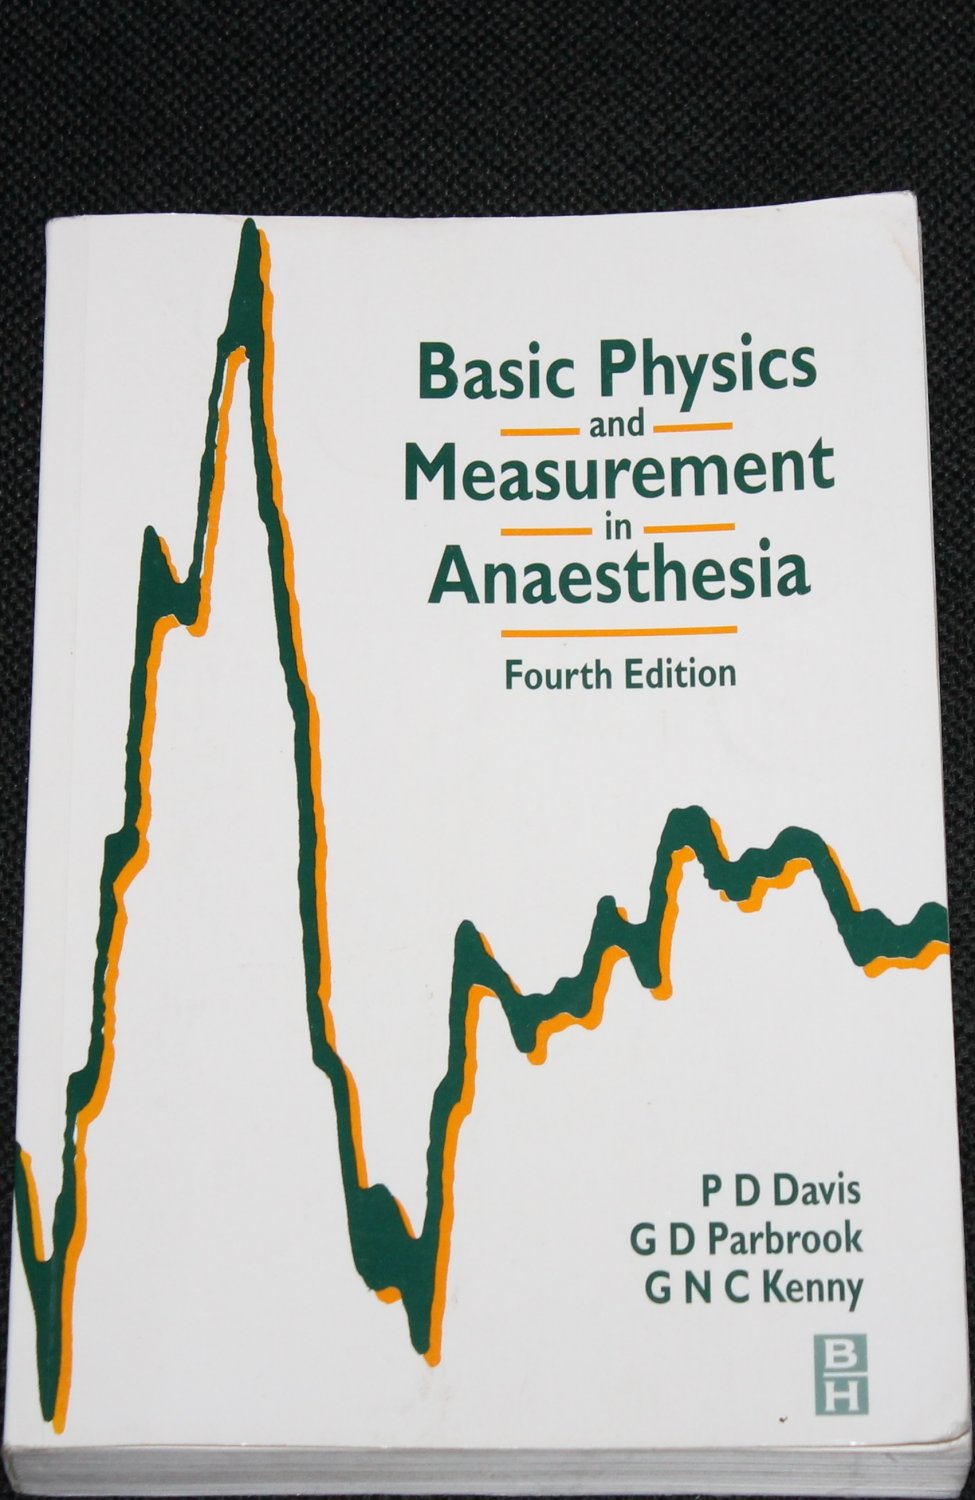 basic physics and measurement in anaesthesia pdf